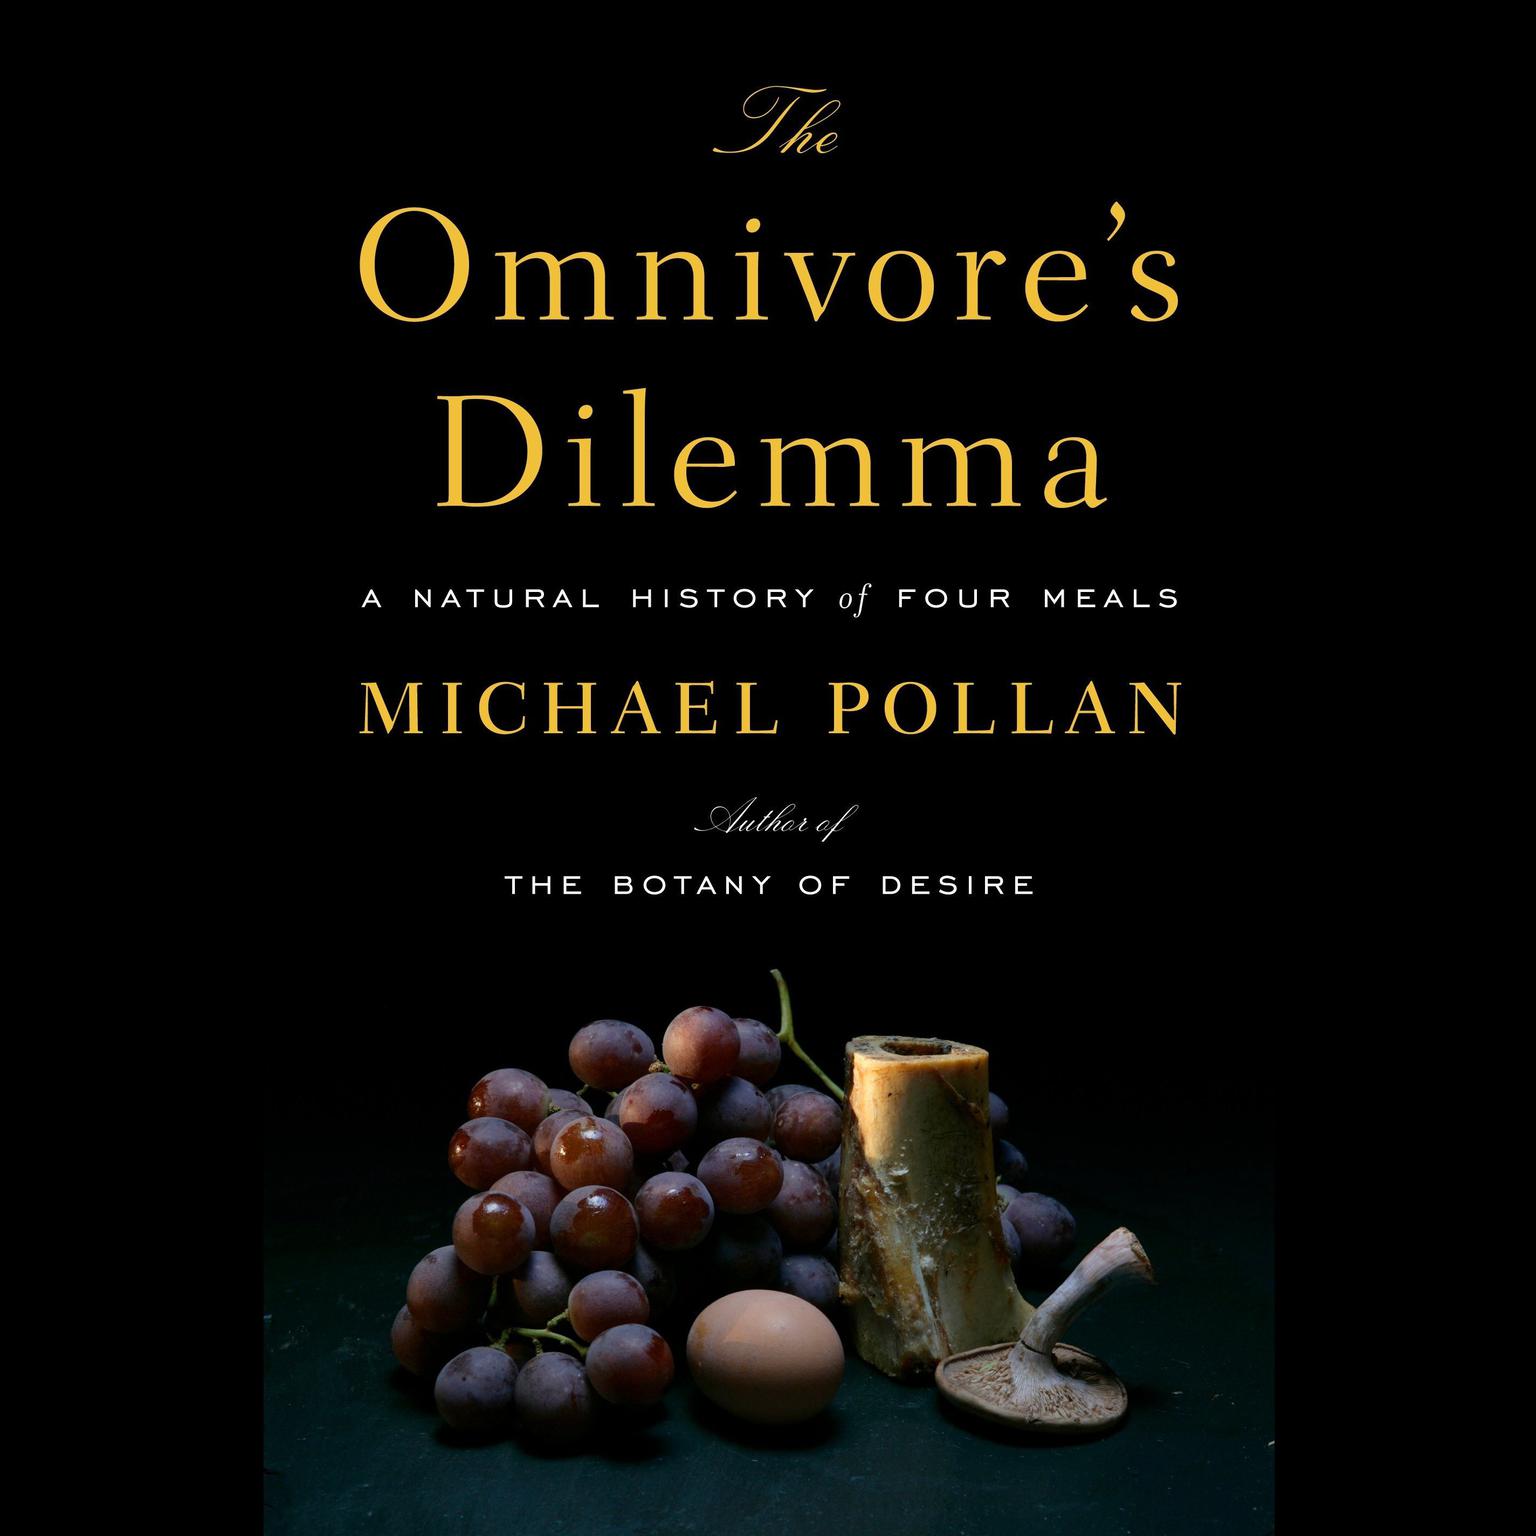 The Omnivores Dilemma: A Natural History of Four Meals Audiobook, by Michael Pollan